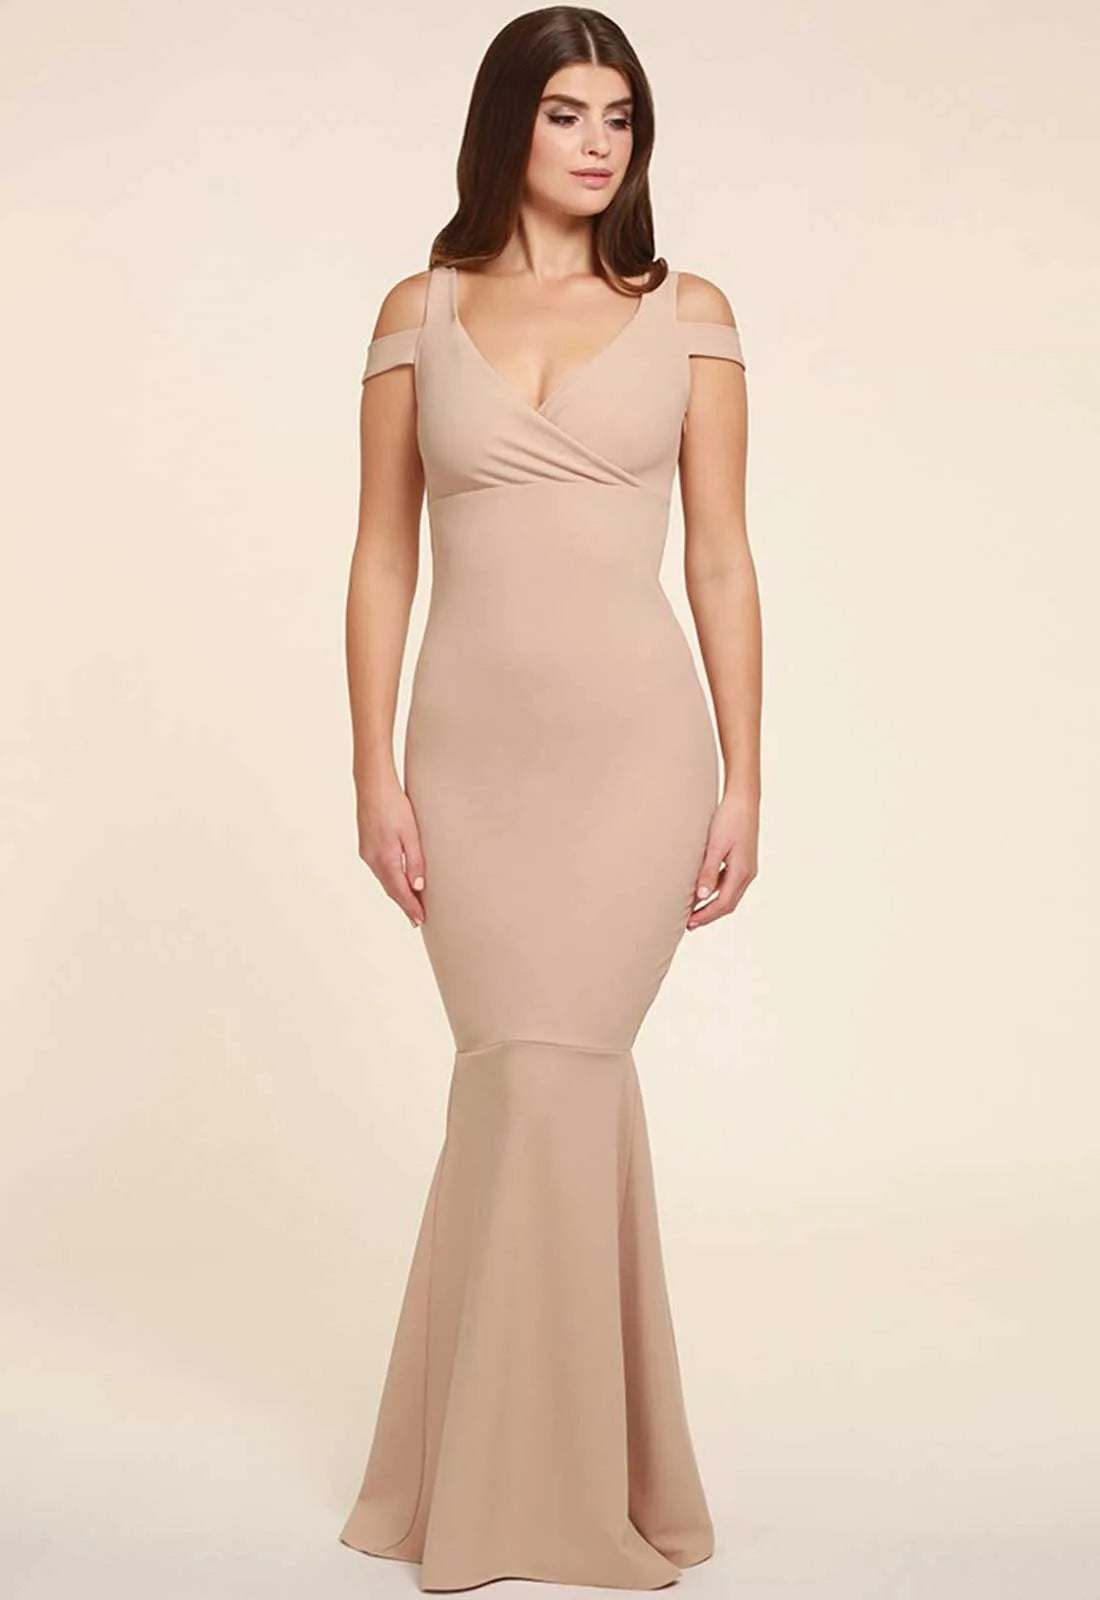 Honor Gold Evie Nude Maxi Dress in Nude